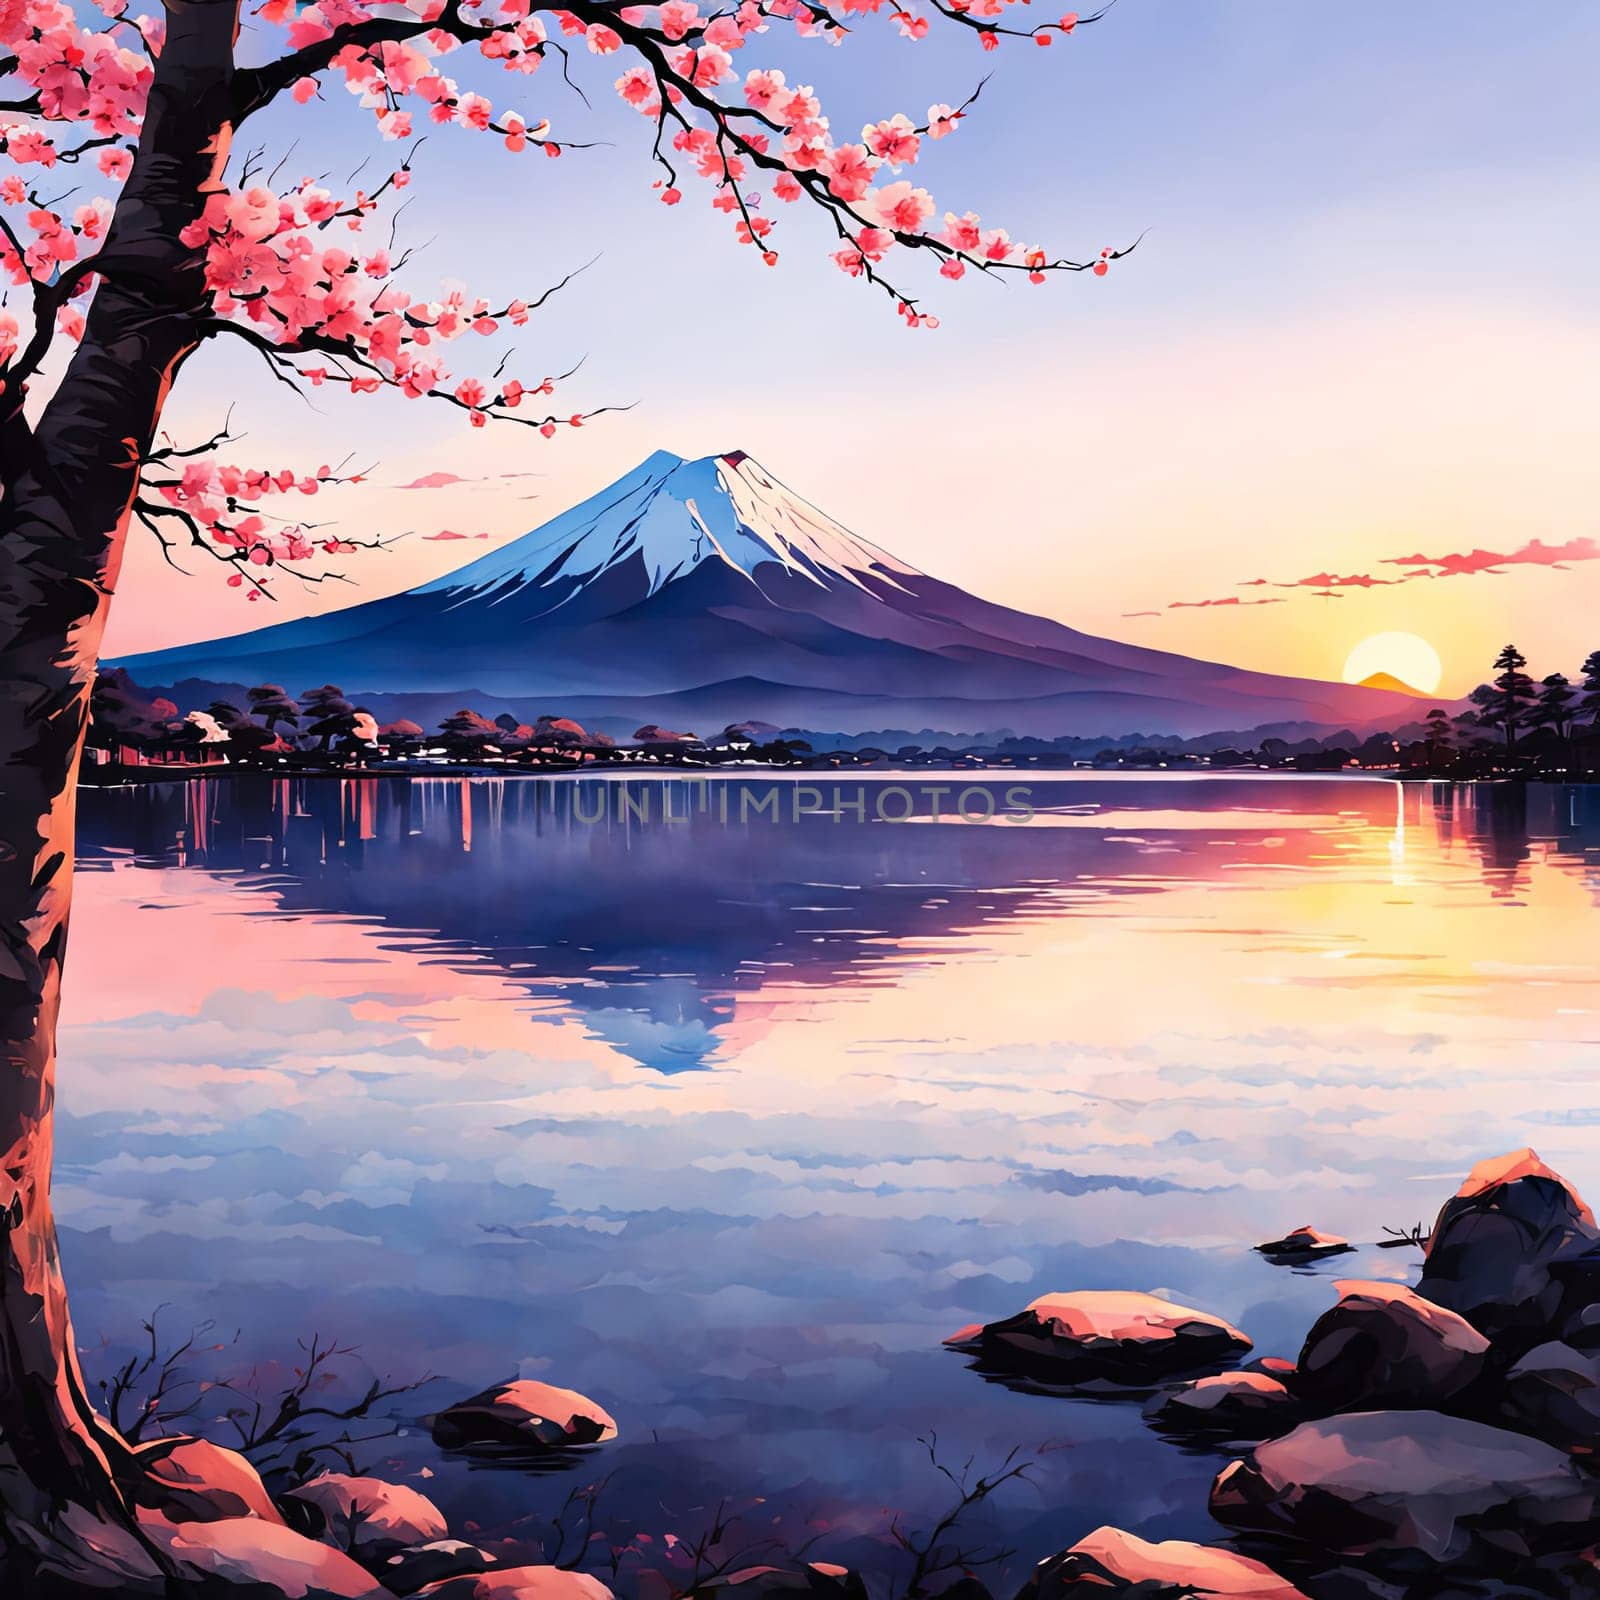 Mount Fuji majestically rising in background, framed by delicate cherry blossoms in full bloom, capturing essence of Japans natural beauty, cultural significance. For art, fashion, style, magazines. by Angelsmoon